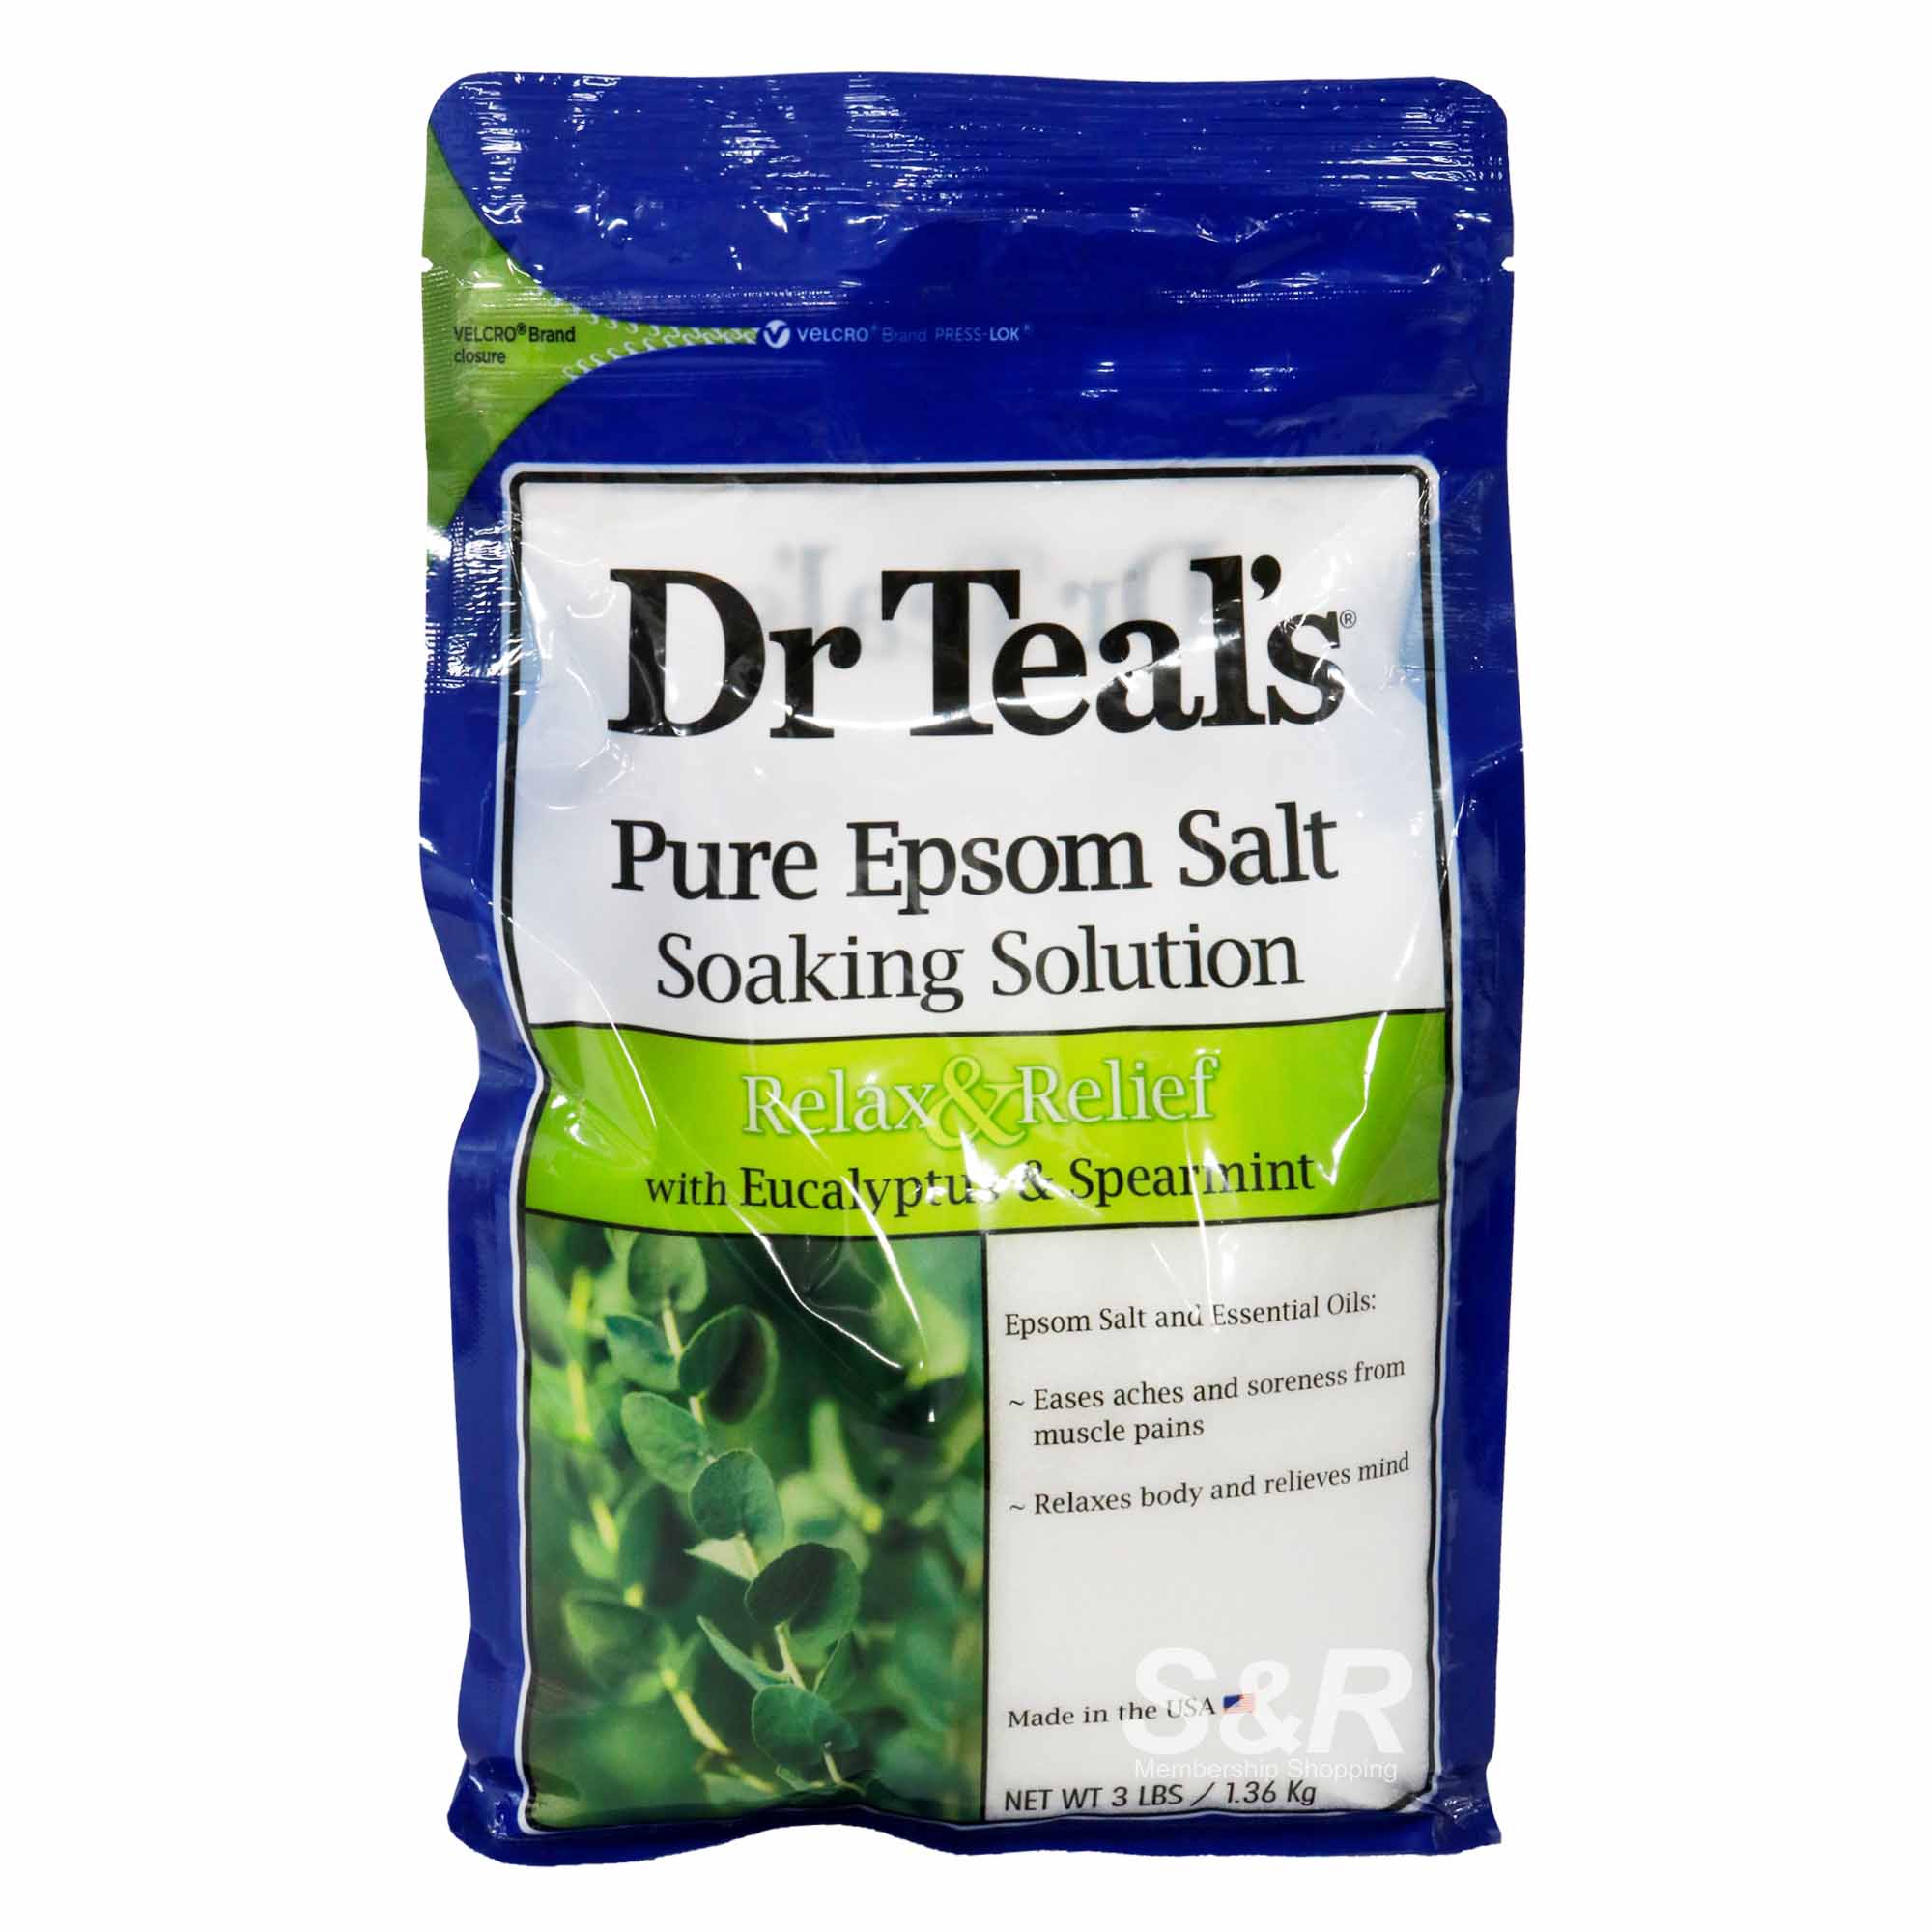 Dr. Teal's Pure Epsom Salt Soaking Solution Relax and Relief with Eucalyptus Spearmint 1.36kg